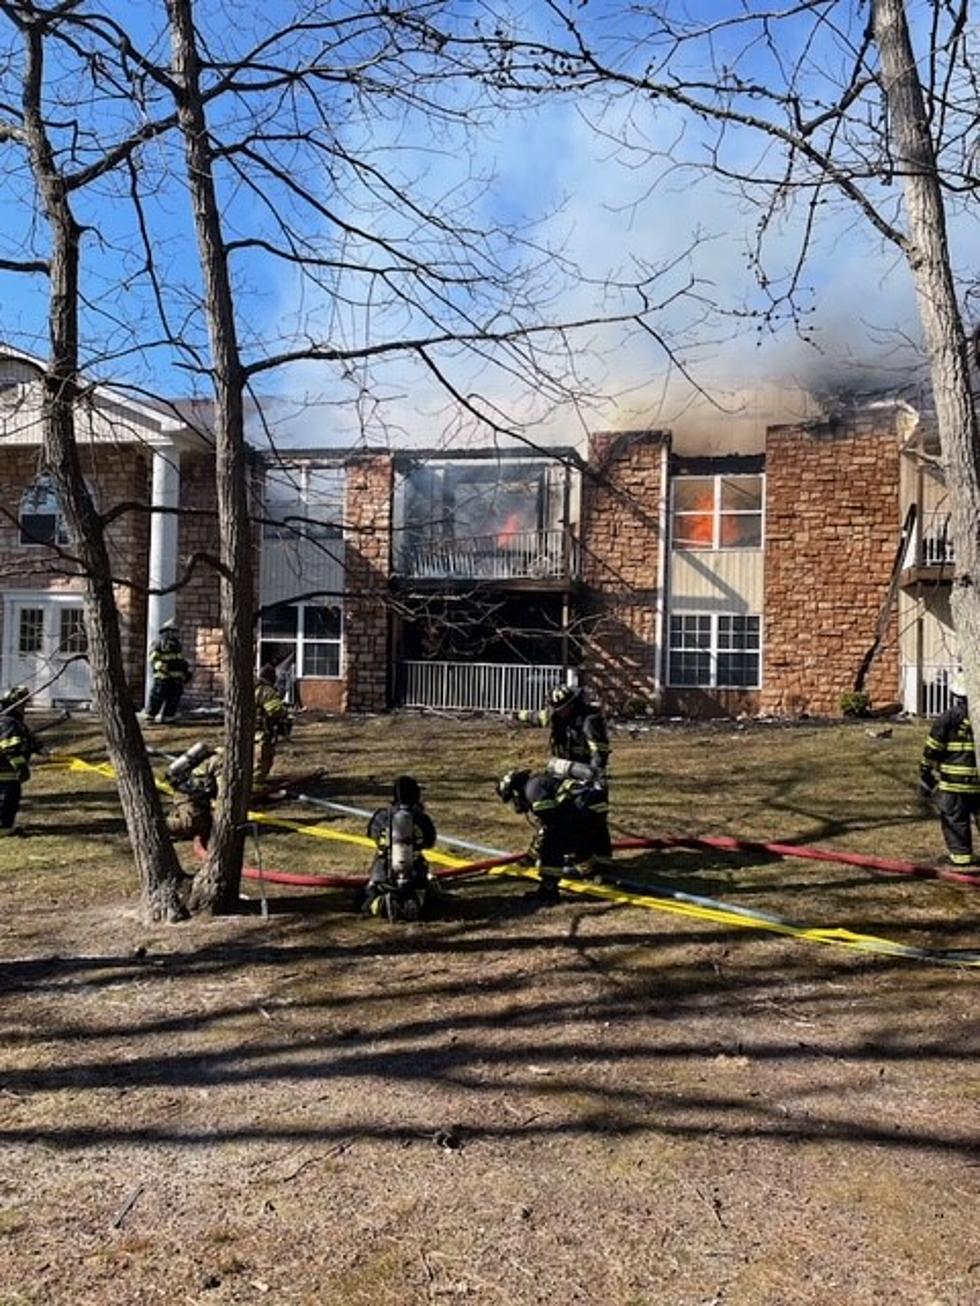 Several pets perish in apartment fire under investigation in Manchester, NJ